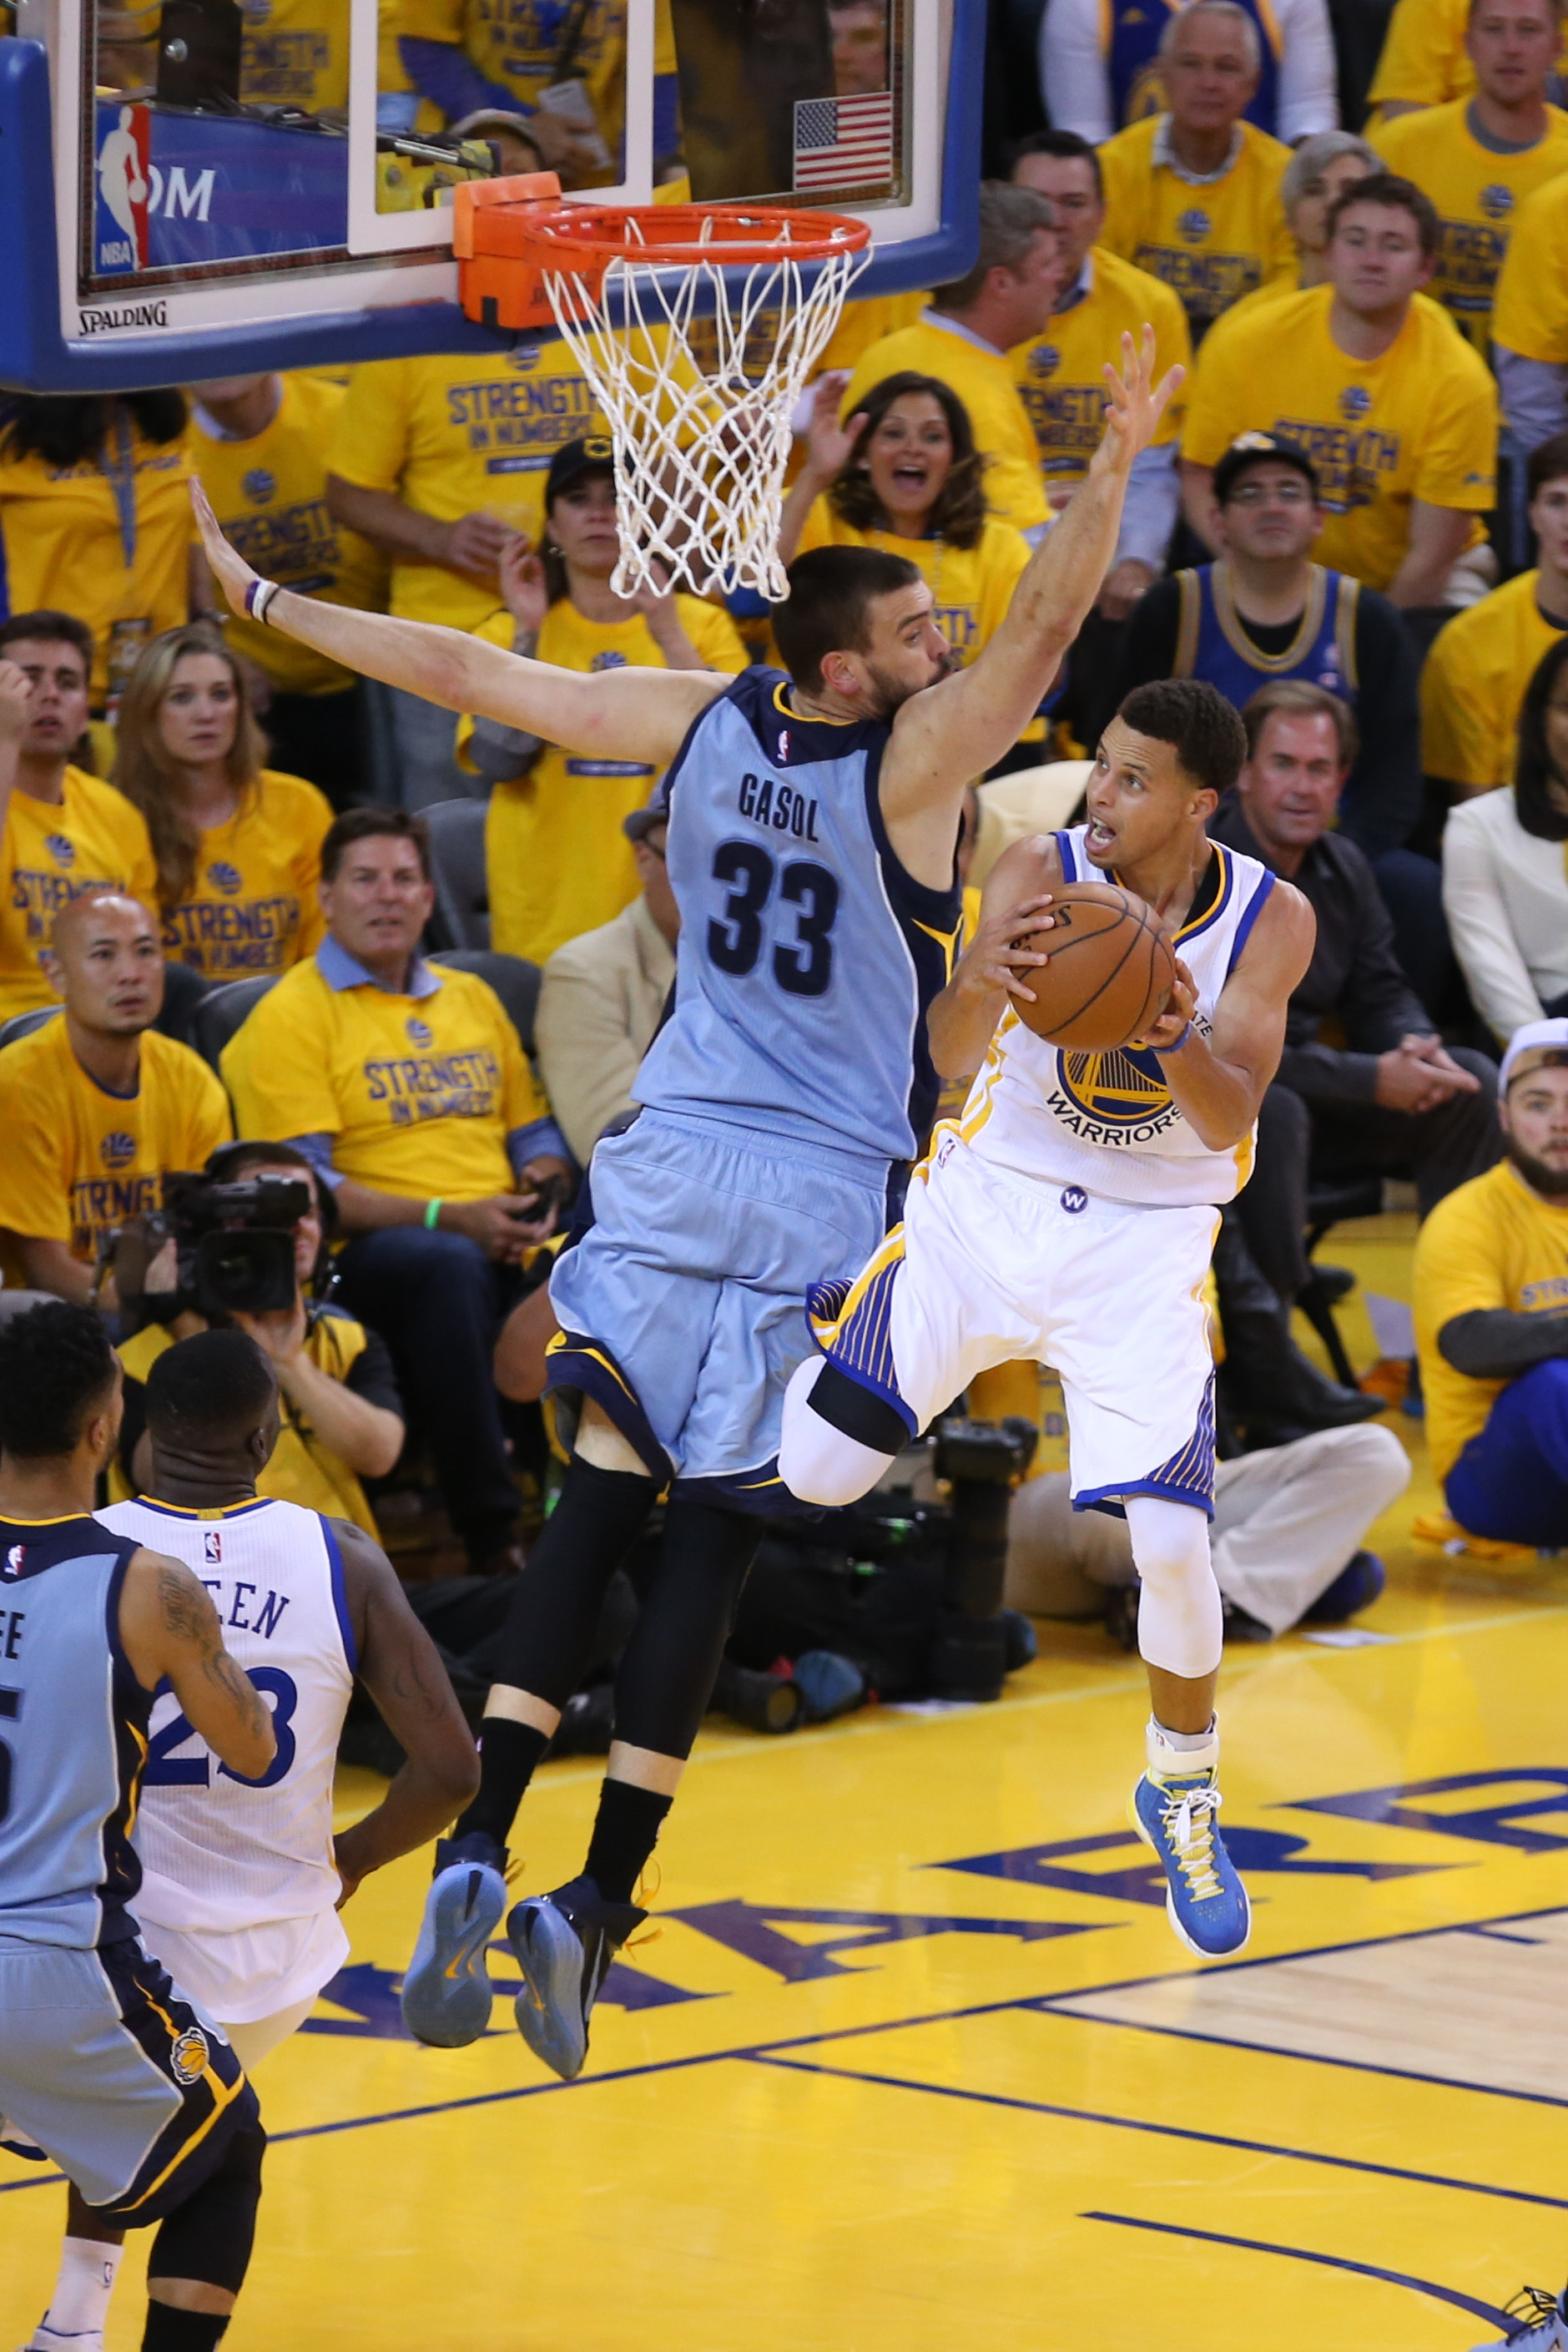 "Wendigo" will need to have a huge game on both ends to slow Steph Curry and company.